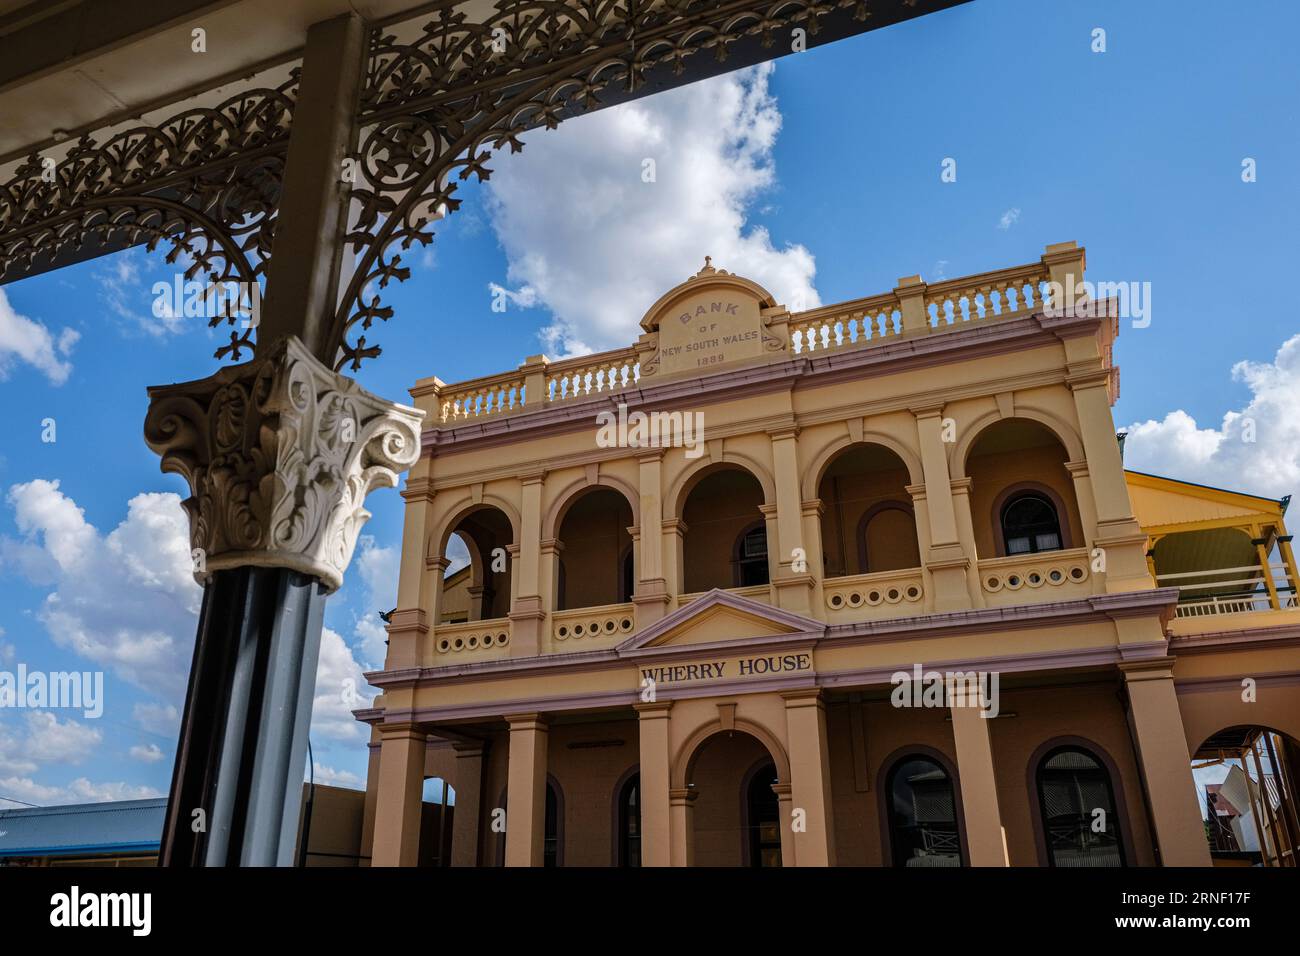 Wherry House - das ehemalige Gebäude der Bank of New South Wales in Charters Towers, Queensland, Australien Stockfoto